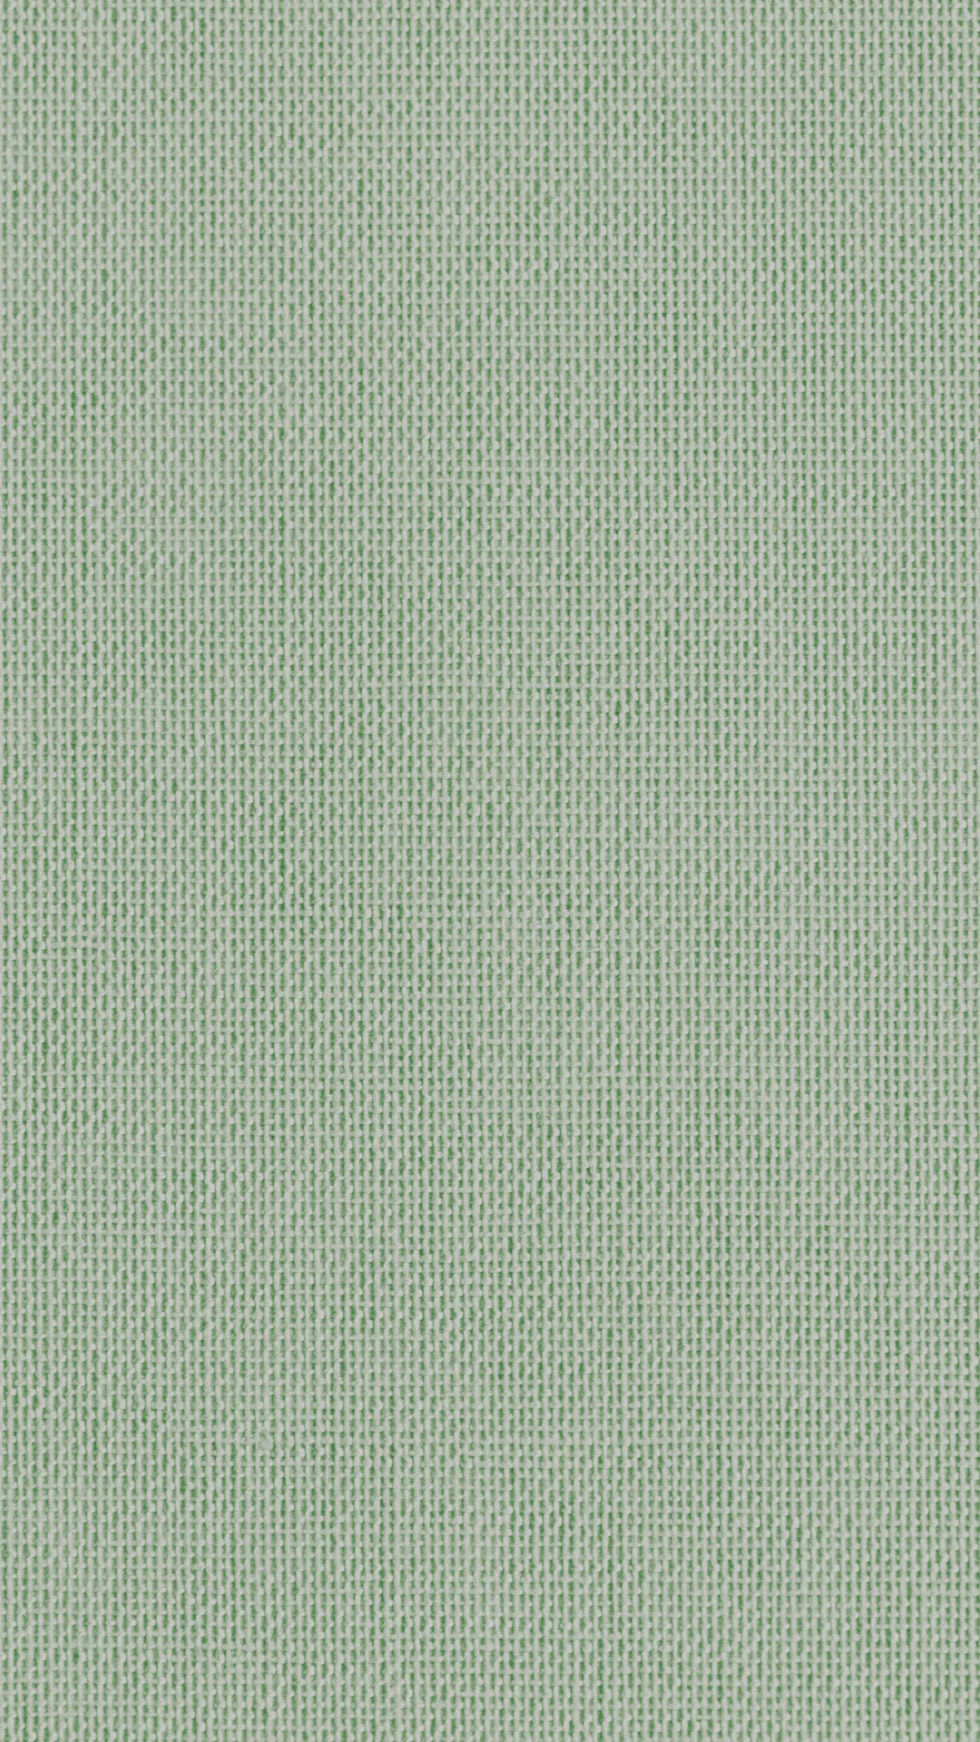 Iphone Sage Green Wallpapers